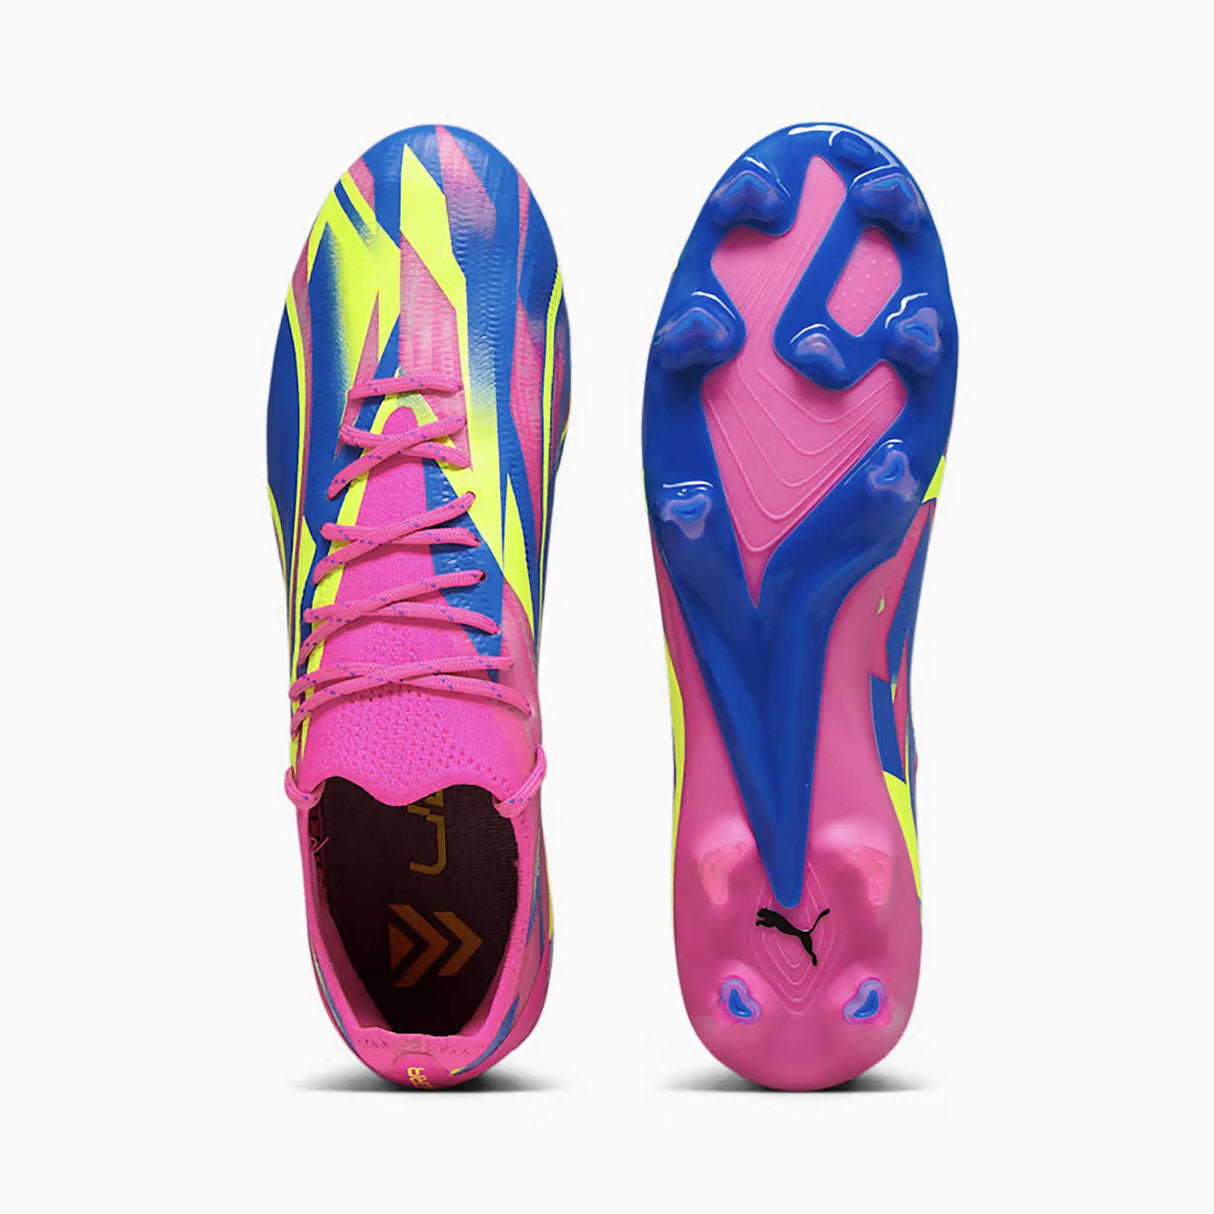 Puma Ultra Ultimate Energy FG/AG chaussures de soccer a crampons crampons- Pink / Ultra Blue / Yellow Alert